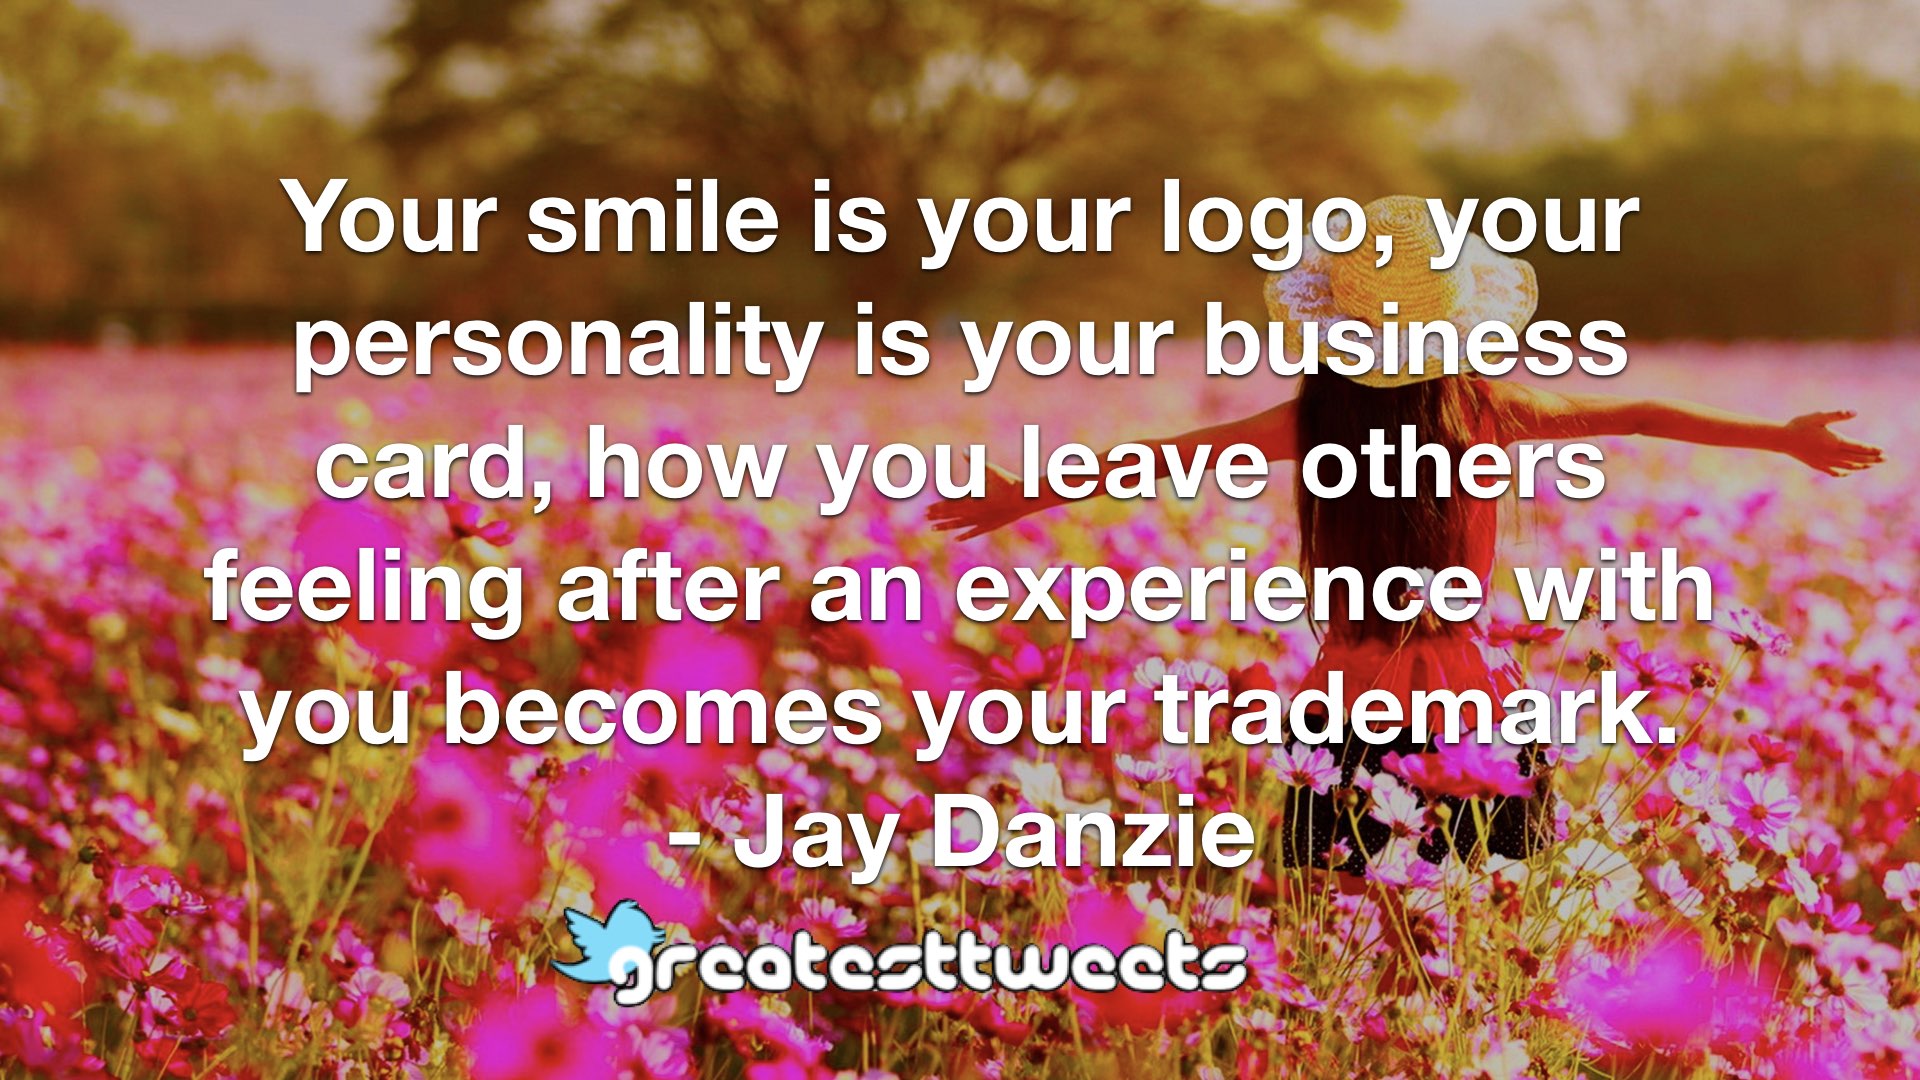 Jay Danzie Quotes | Greatesttweets.com